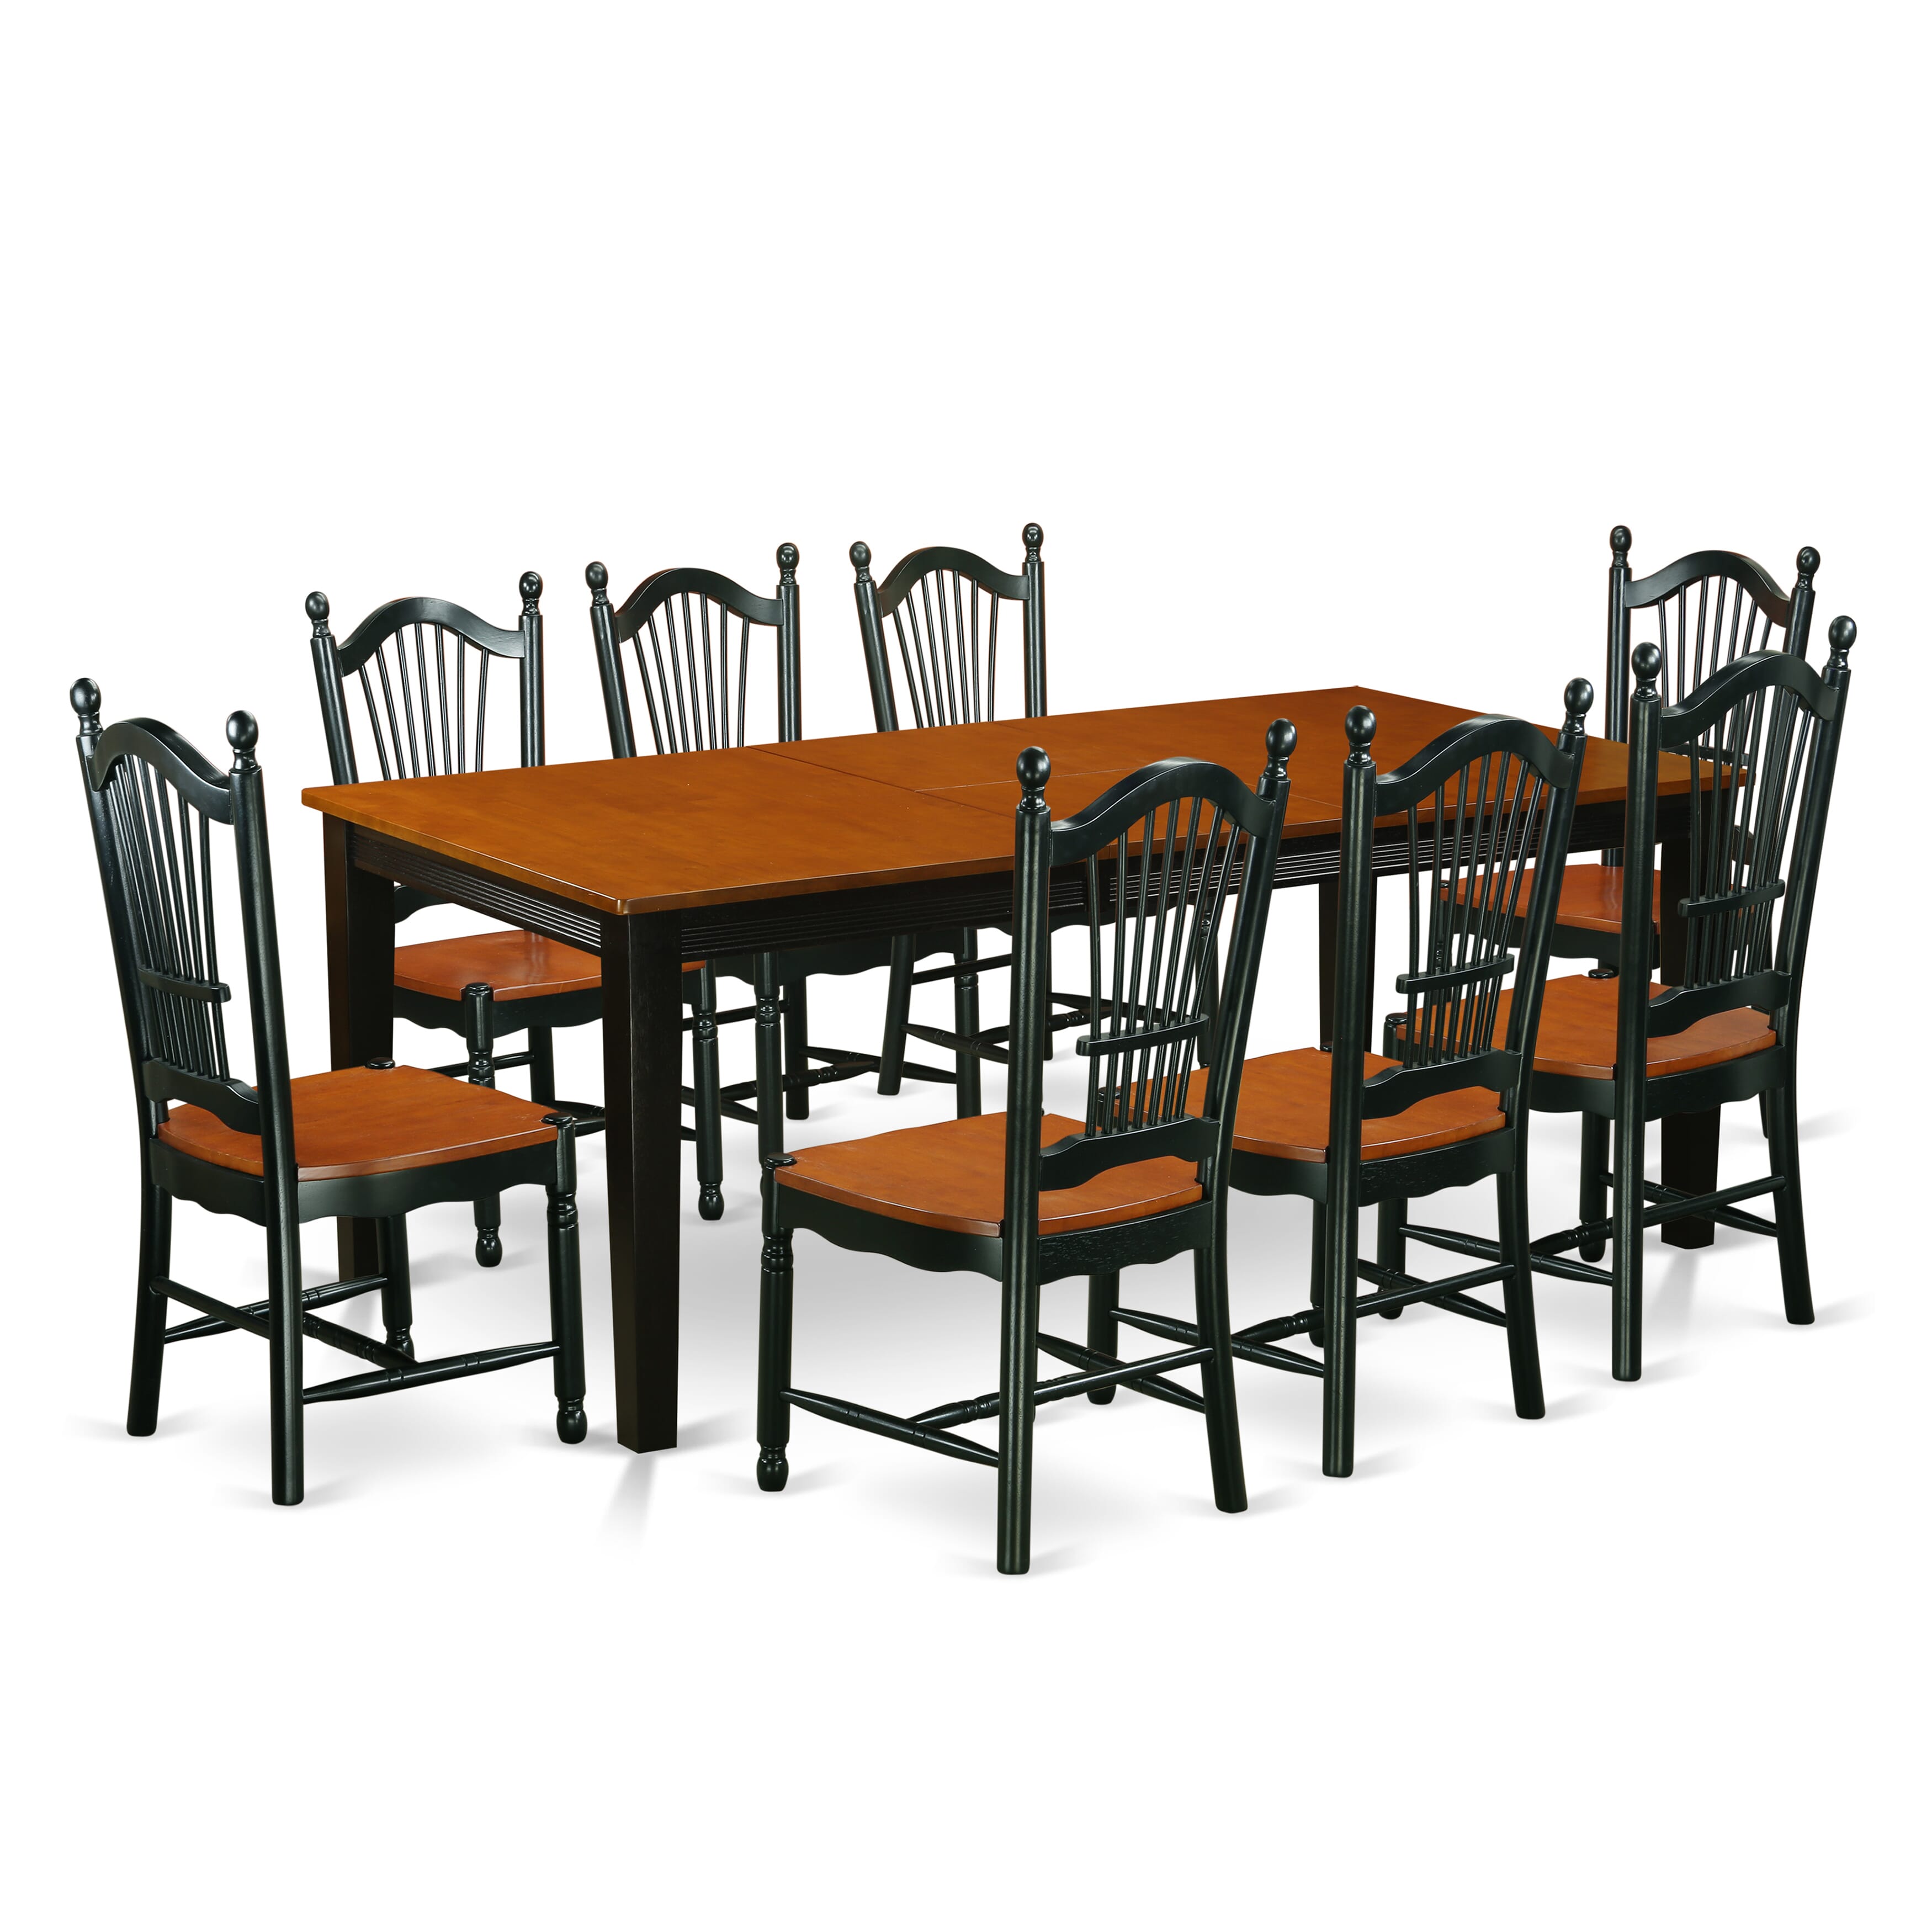 2 Tone 9 Pc Dining Room Rectangular Table W/ Fan Back Chairs Set in Black / Cherry